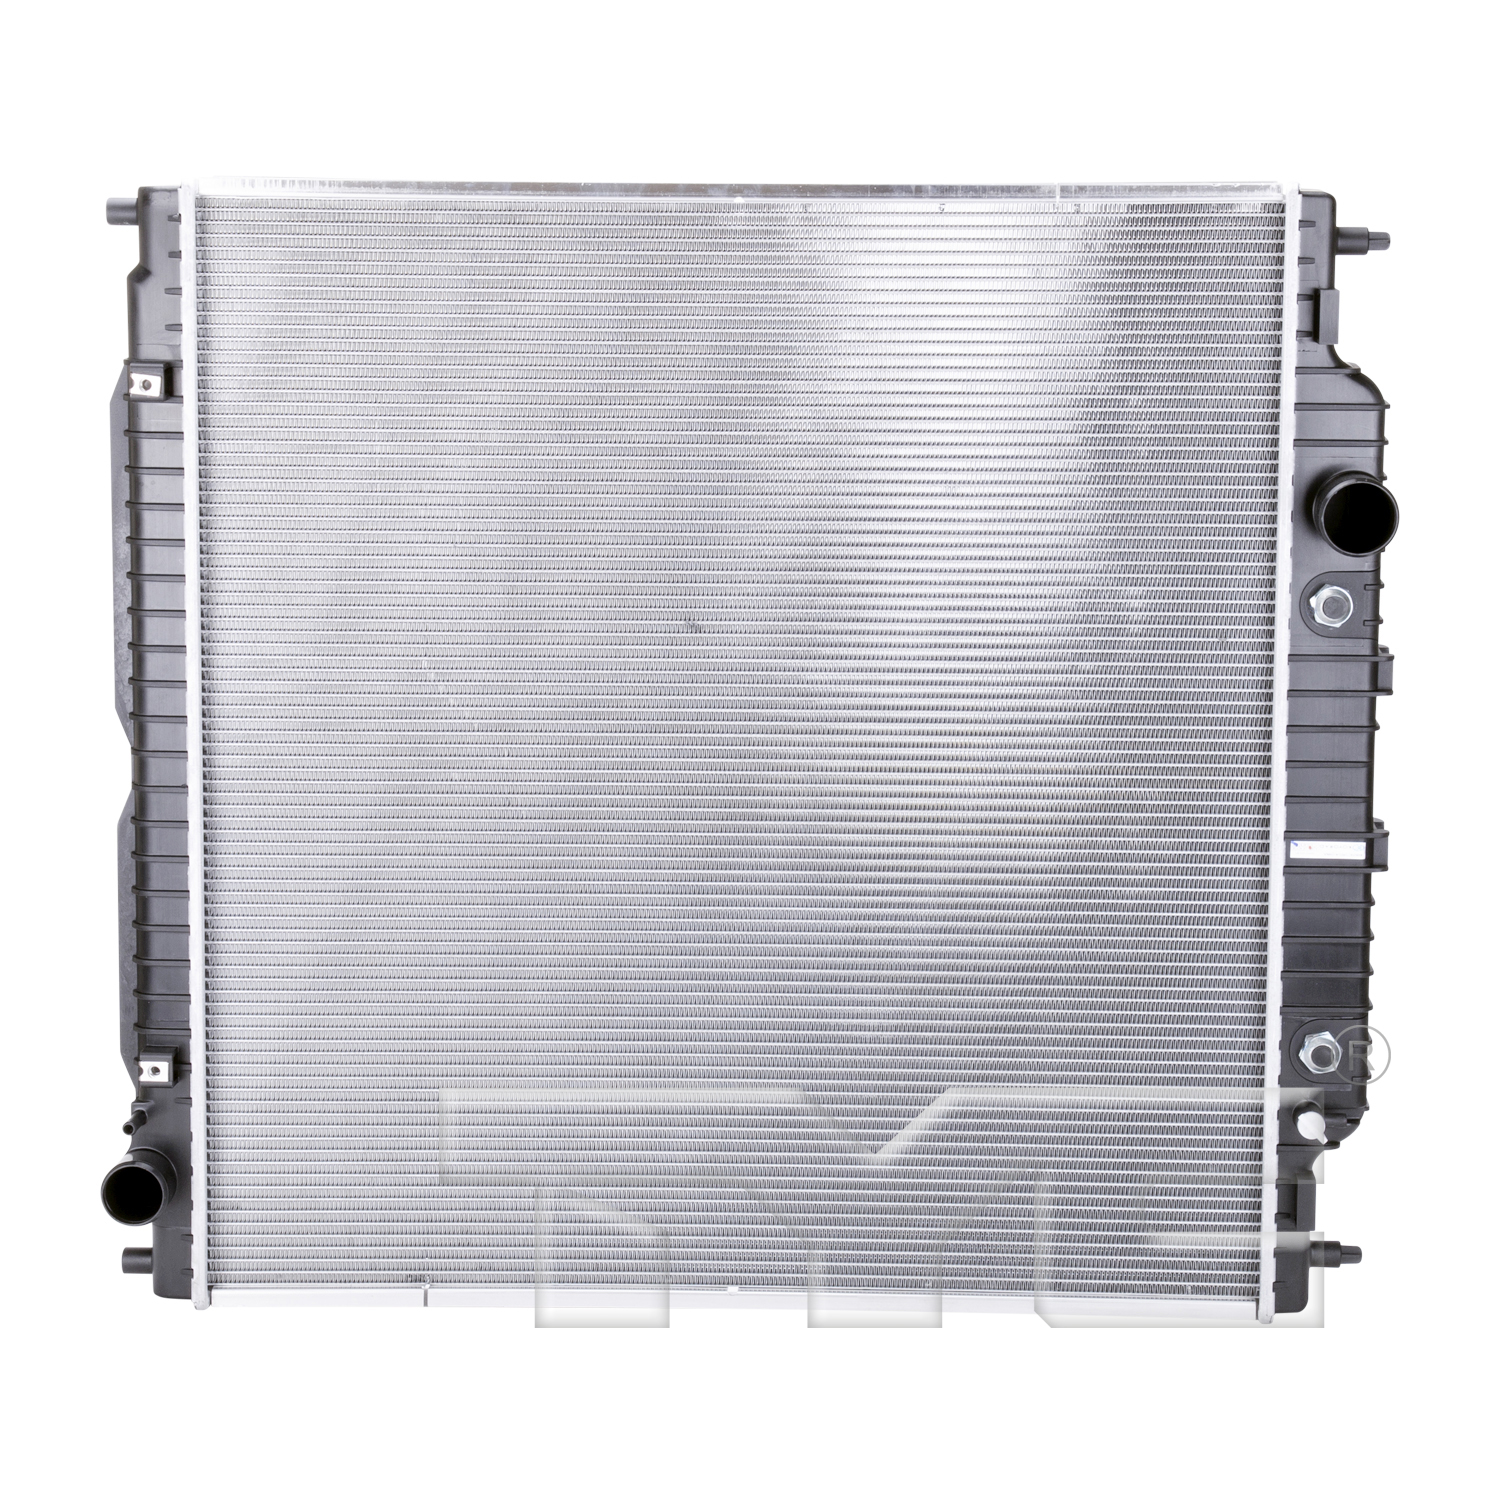 Aftermarket RADIATORS for FORD - F-250 SUPER DUTY, F-250 SUPER DUTY,05-07,Radiator assembly